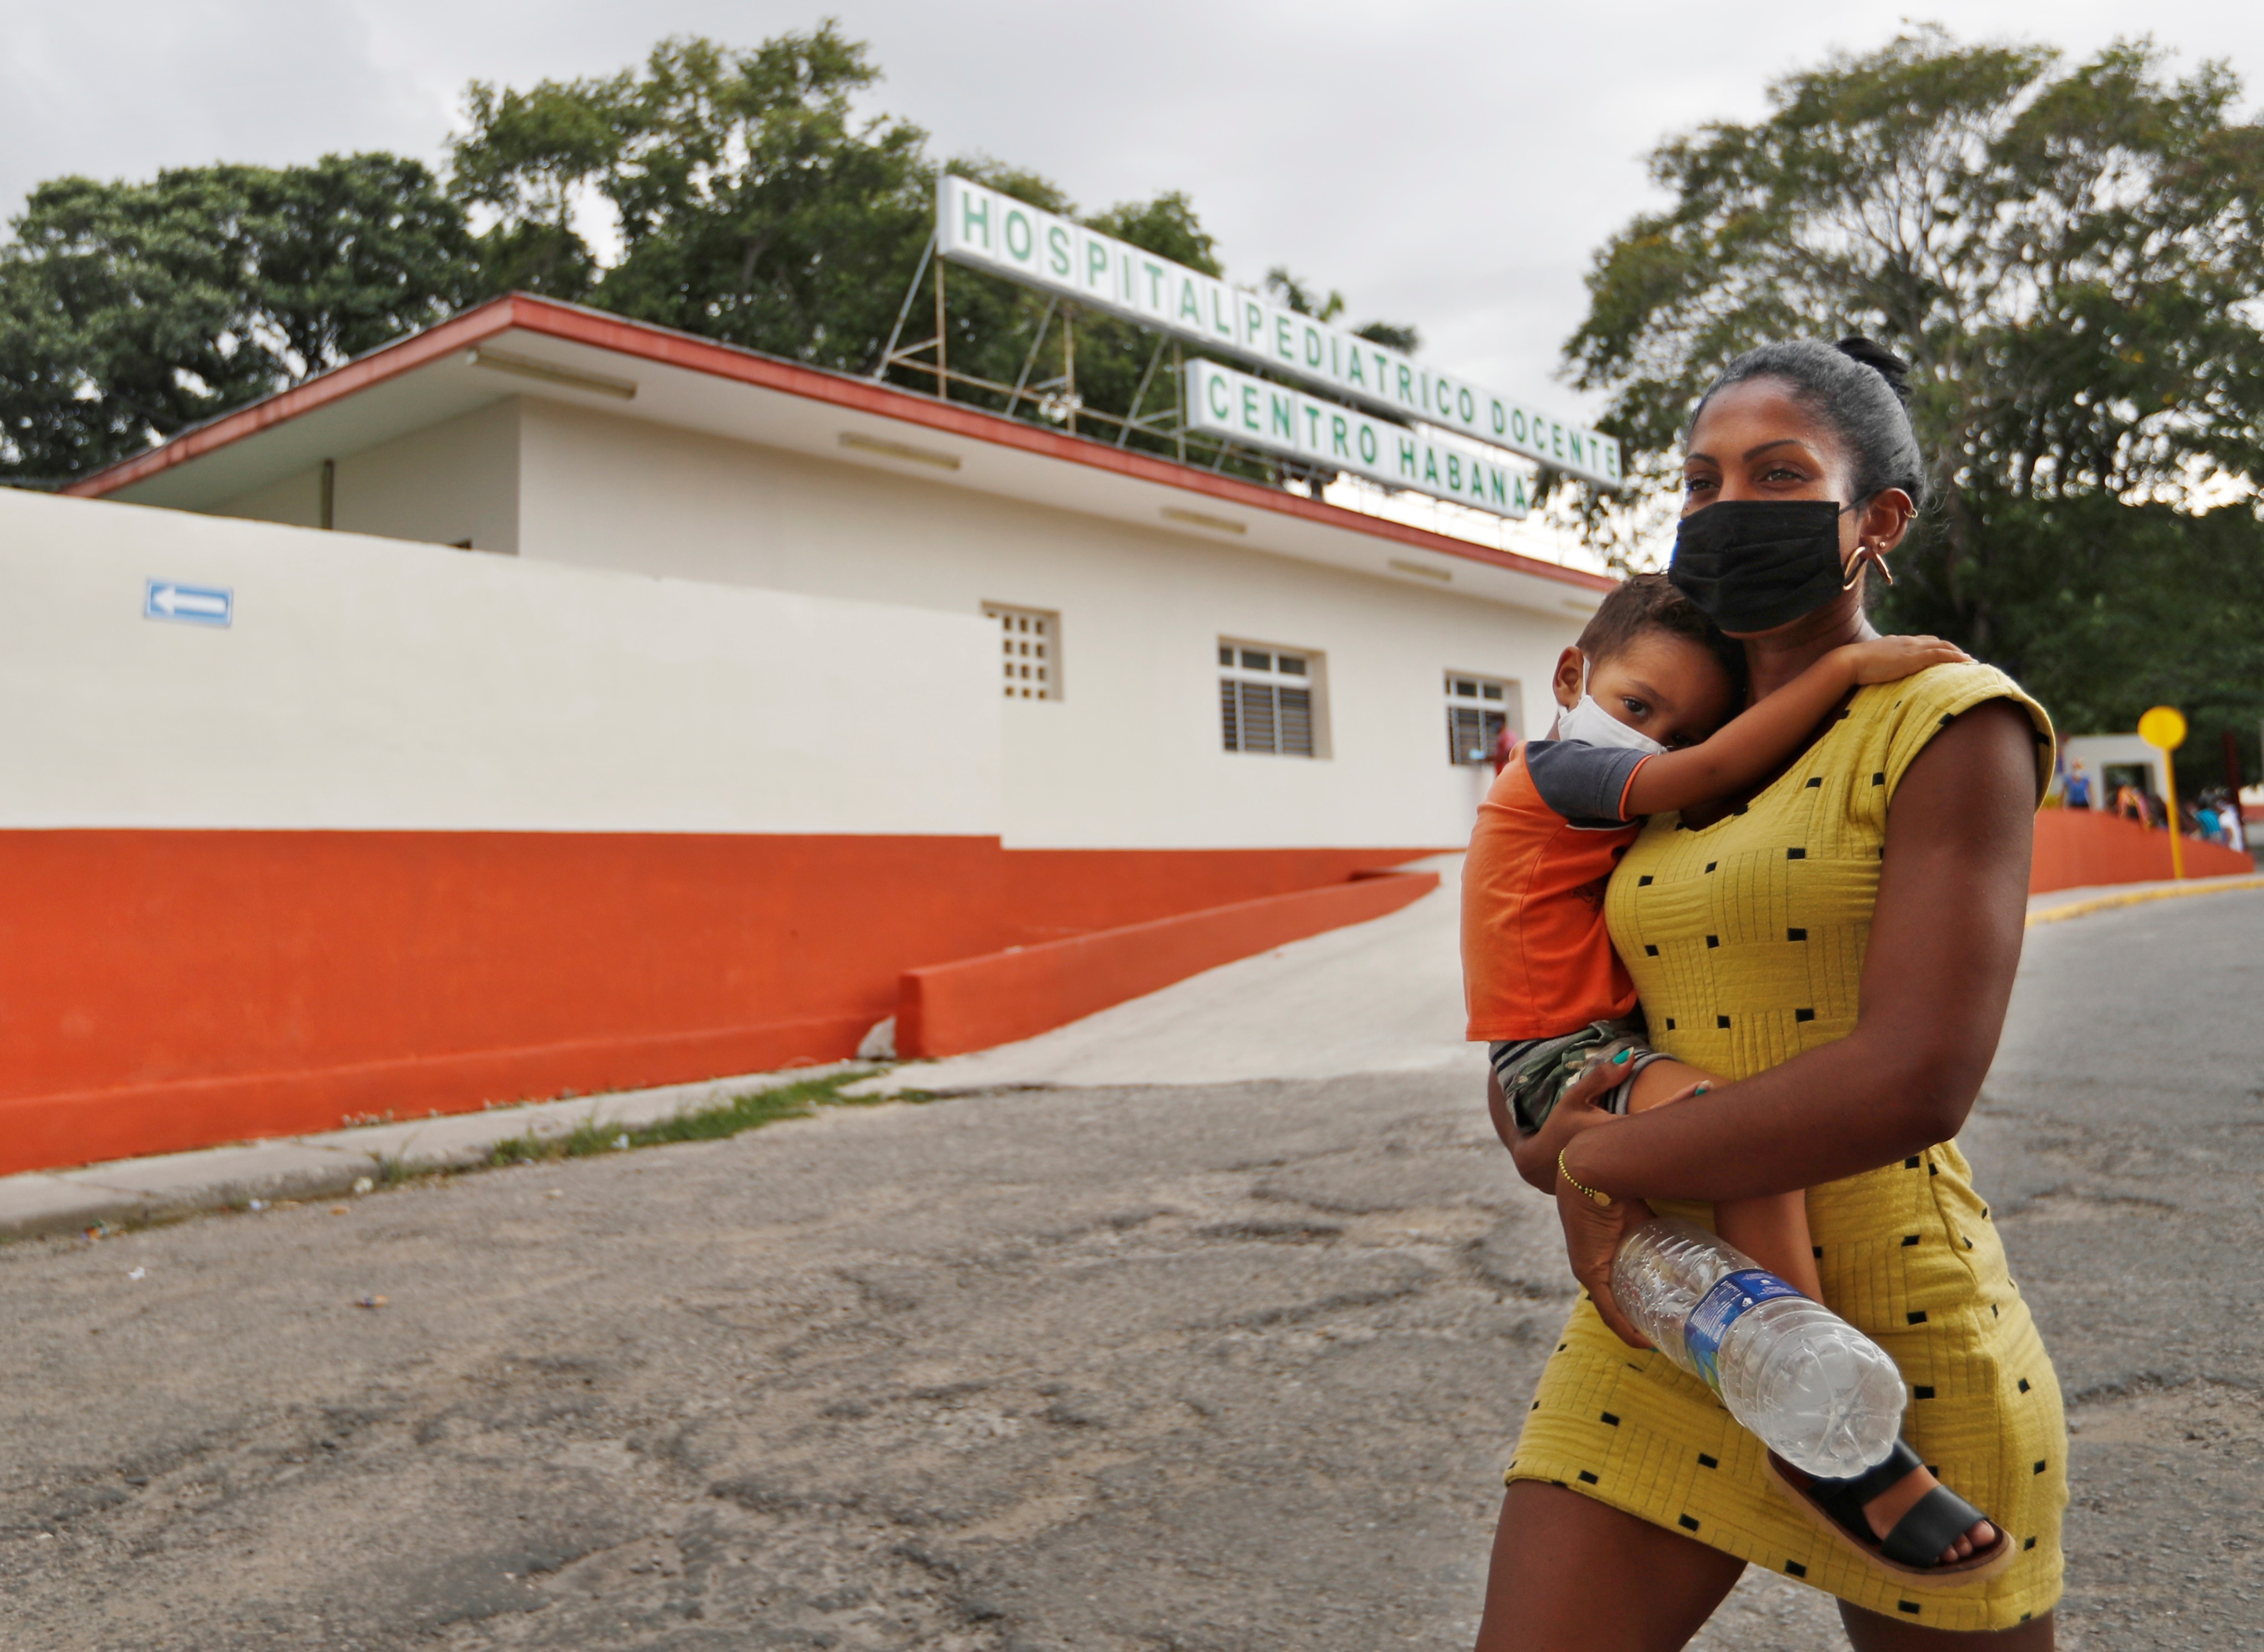 A mother with her son in her arms leaves a pediatric hospital in Havana (Cuba), in a file photograph.  EFE / Yander Zamora